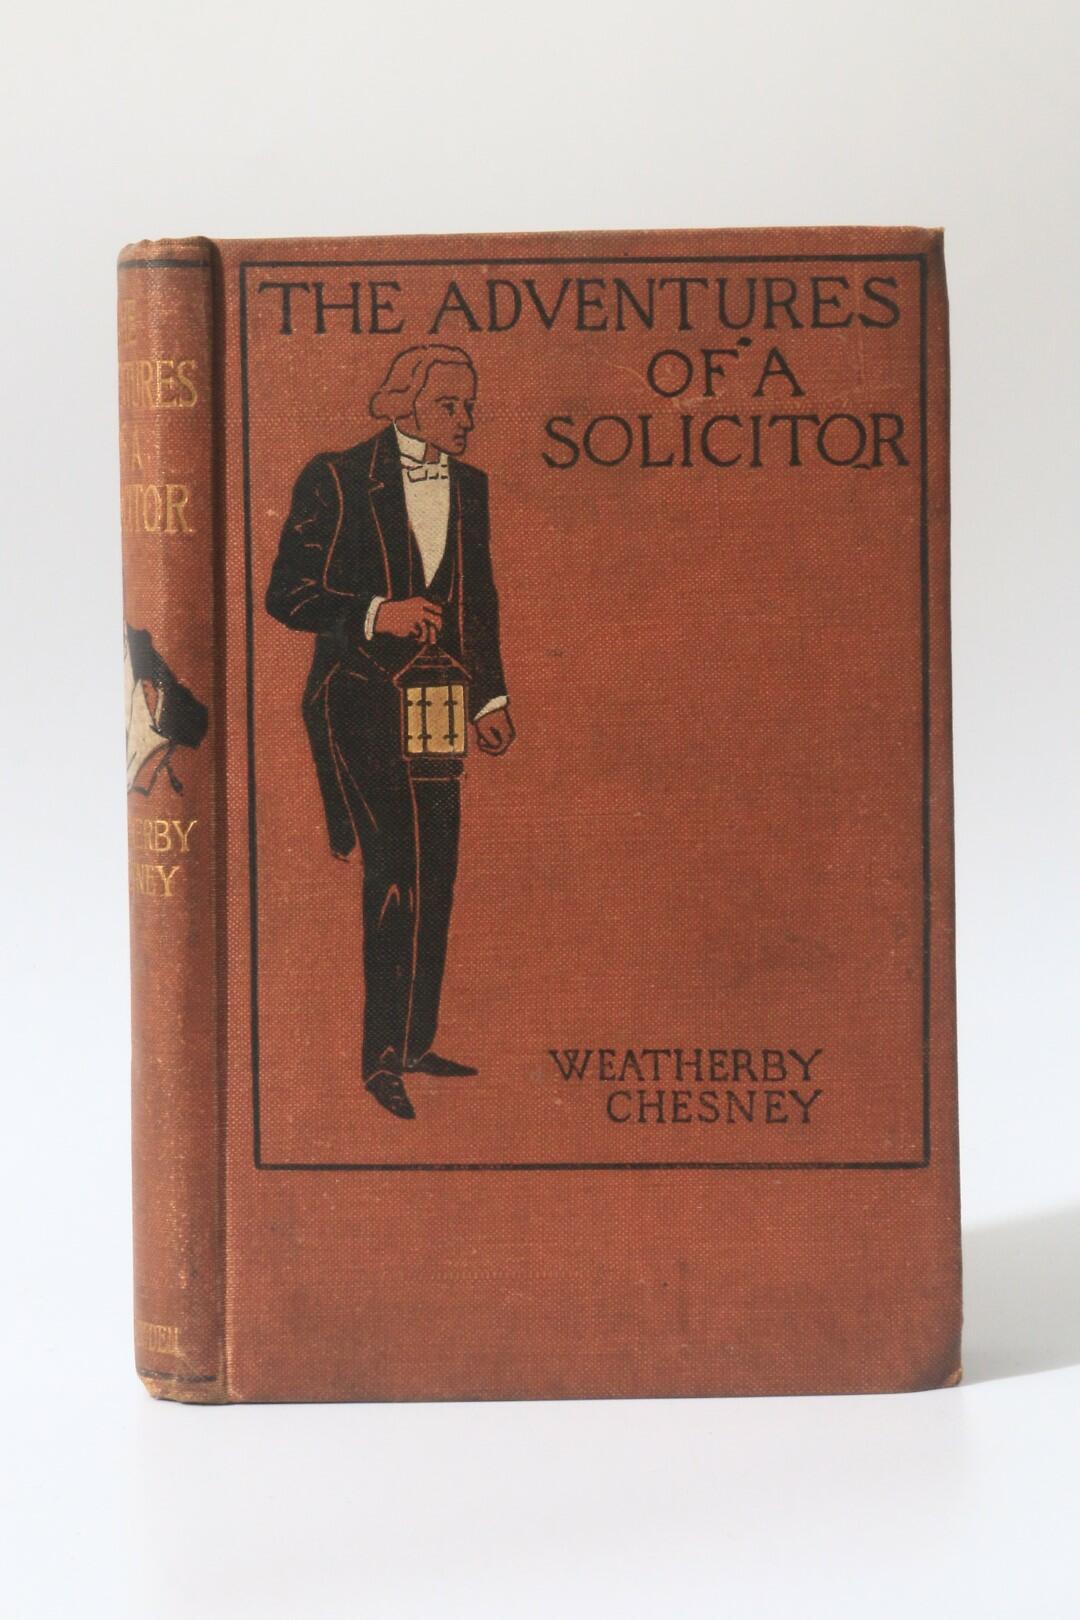 Weatherby Chesney [C.J. Cutcliffe Hyne] - The Adventures of a Solicitor - James Bowden, 1898, First Edition.